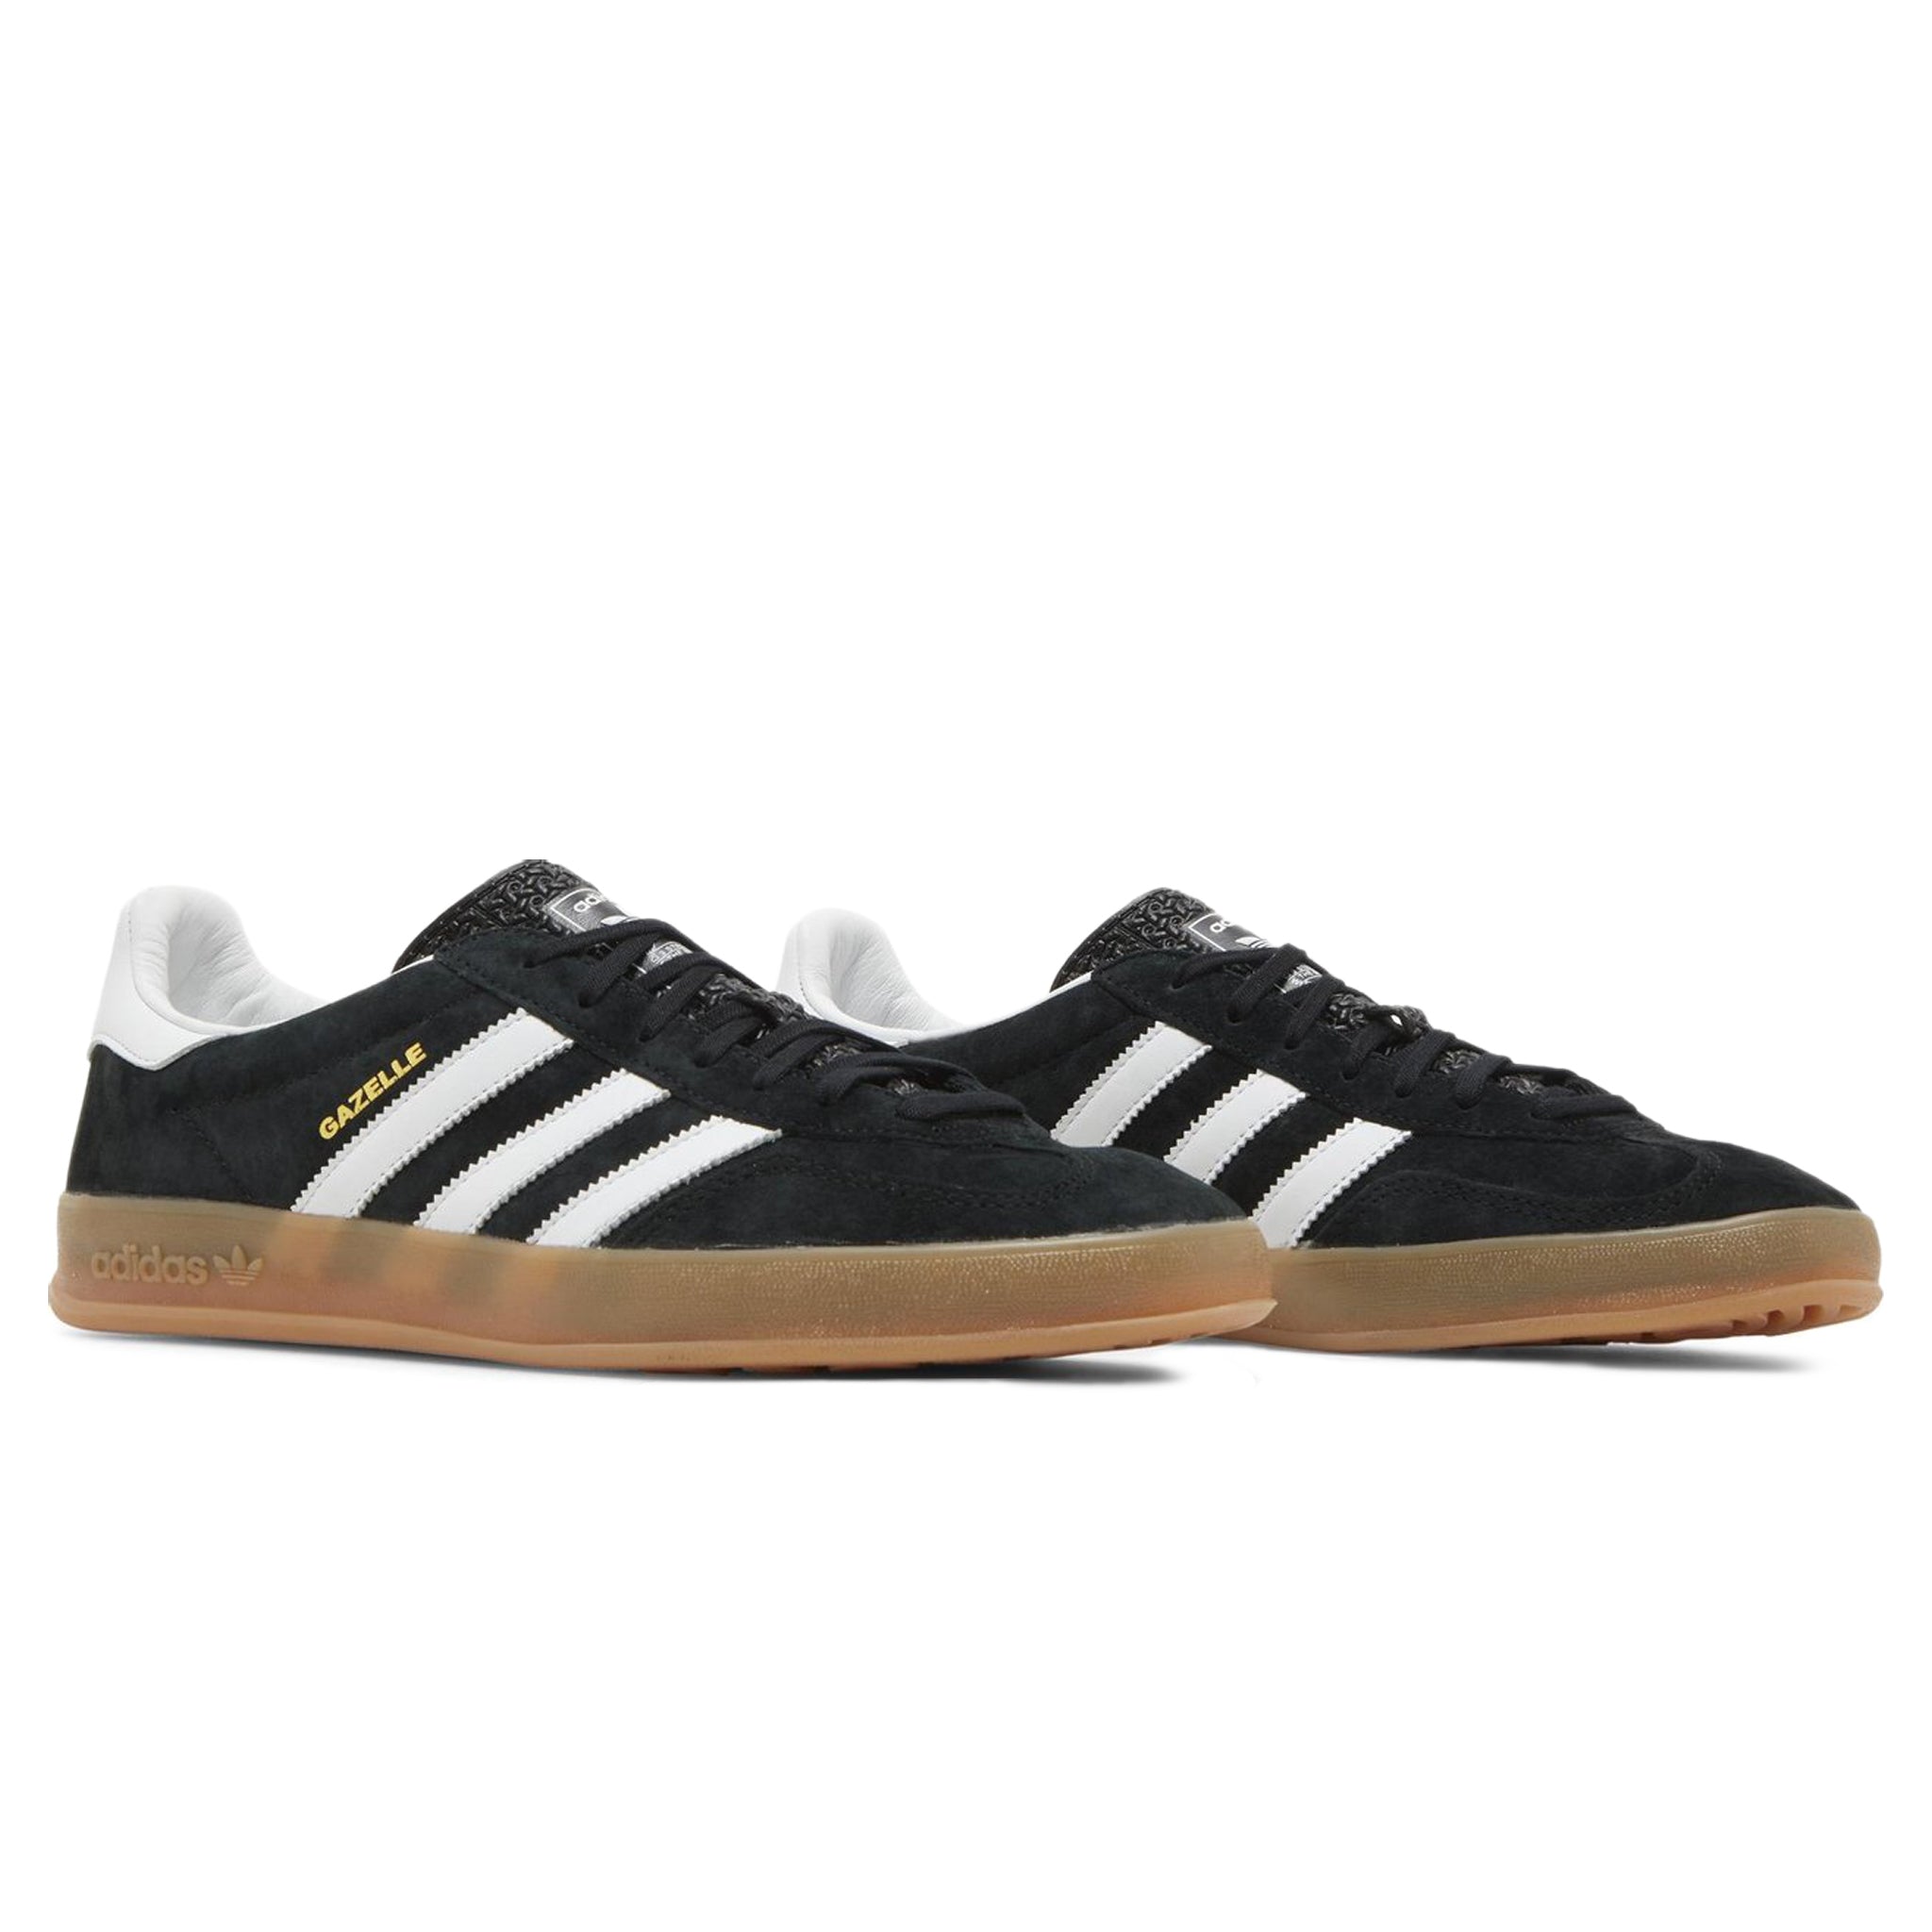 Front side view of Adidas Gazelle Black White Gum H06259